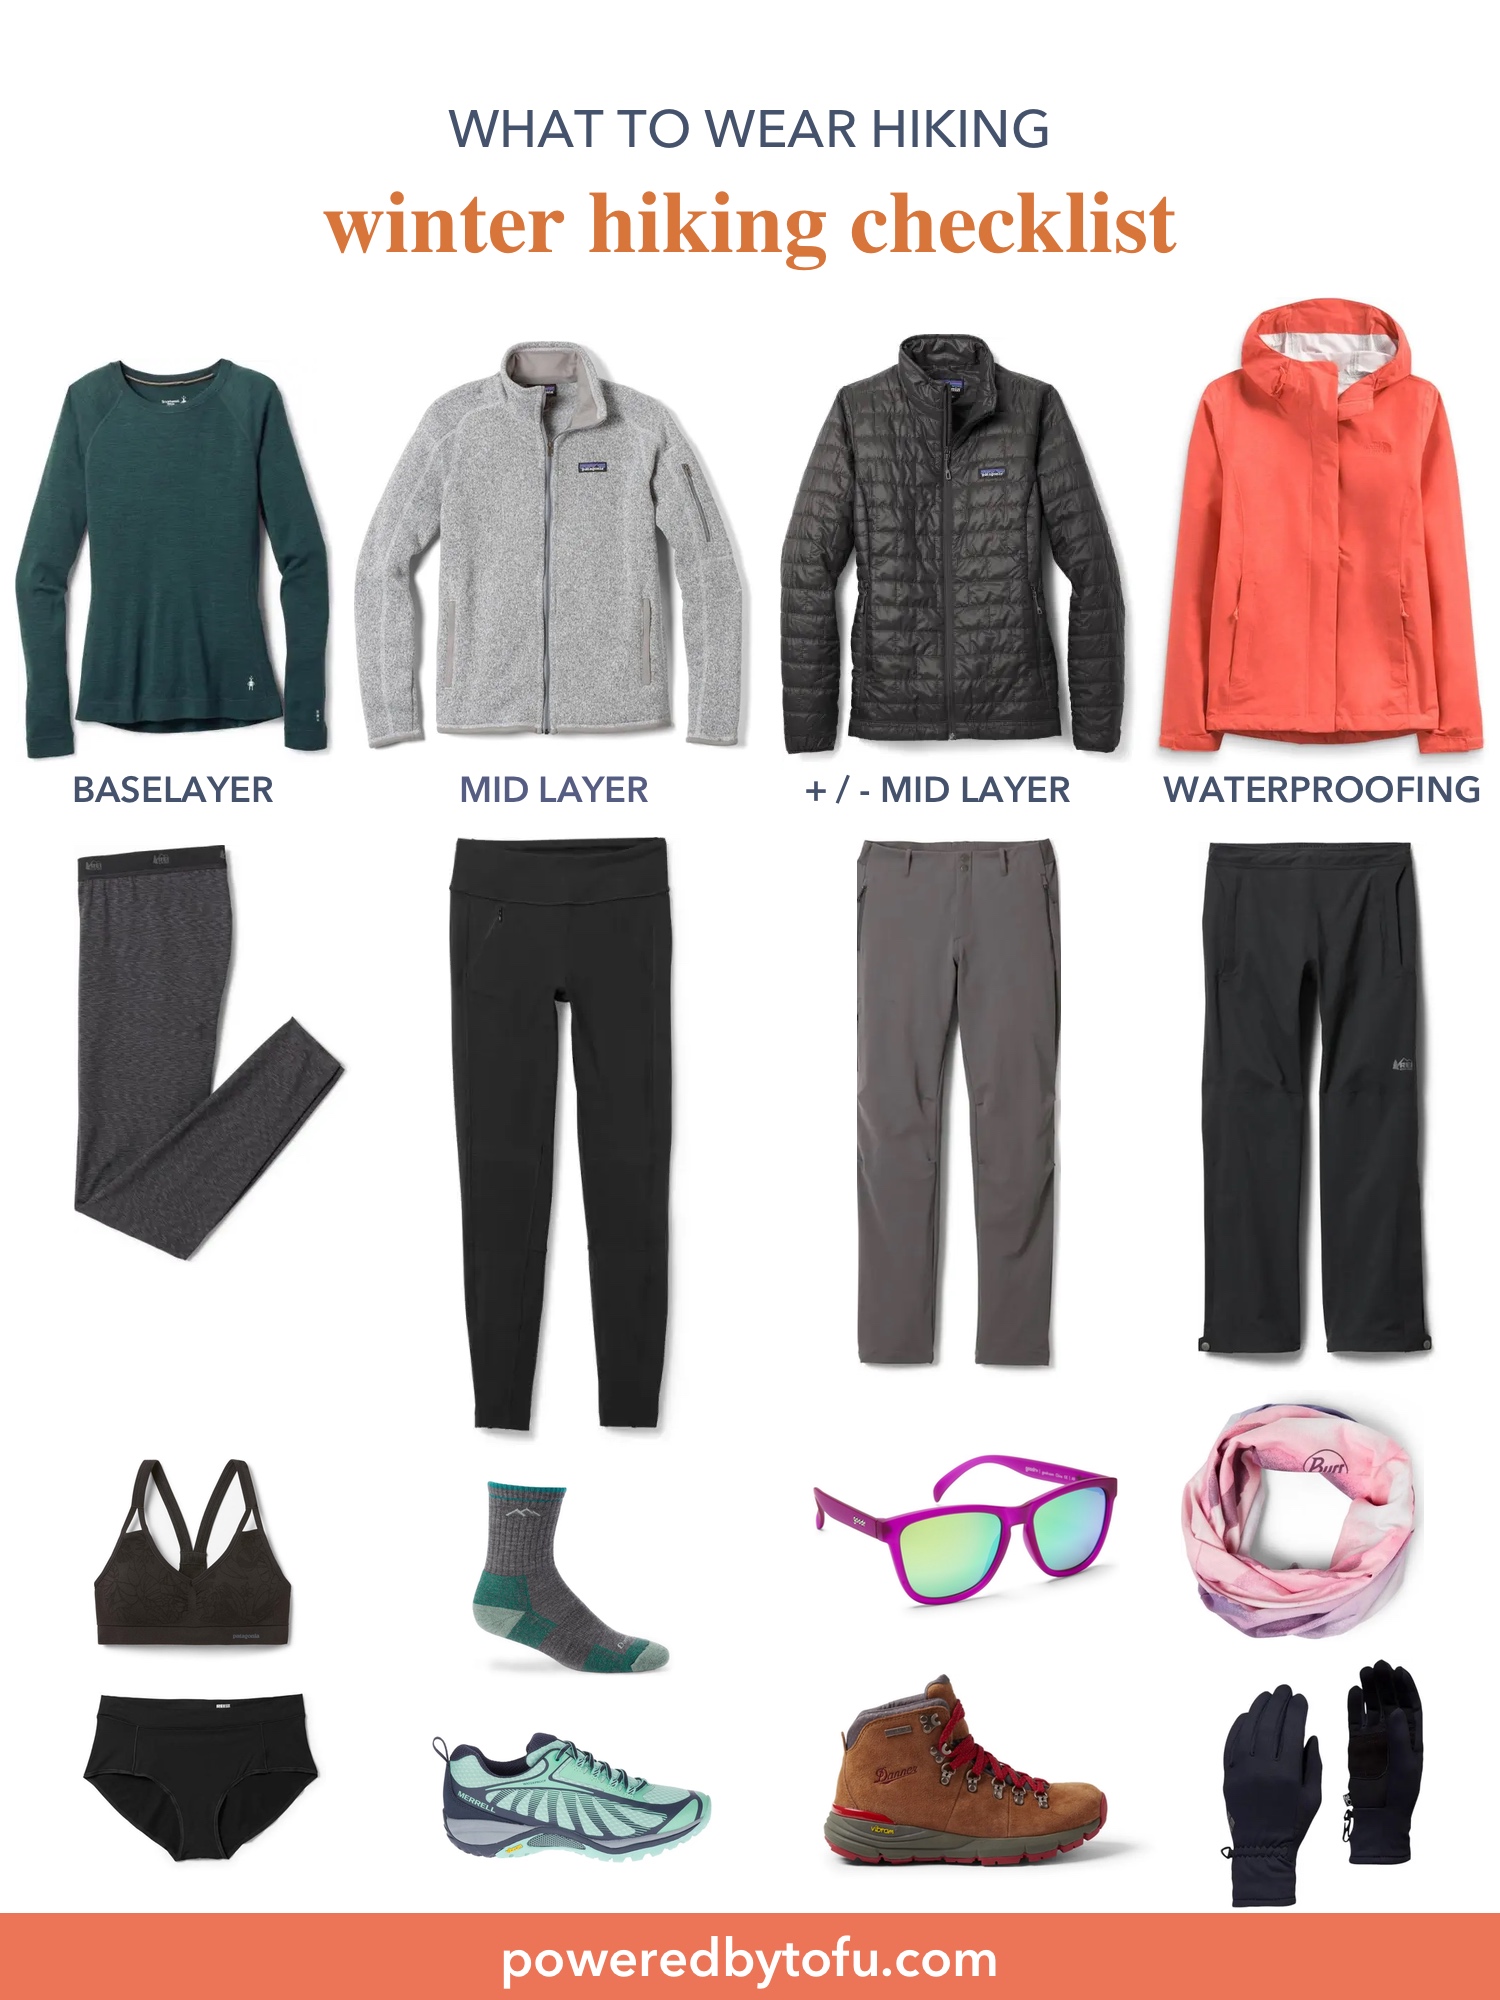 What to Wear for Hiking in Cold Weather